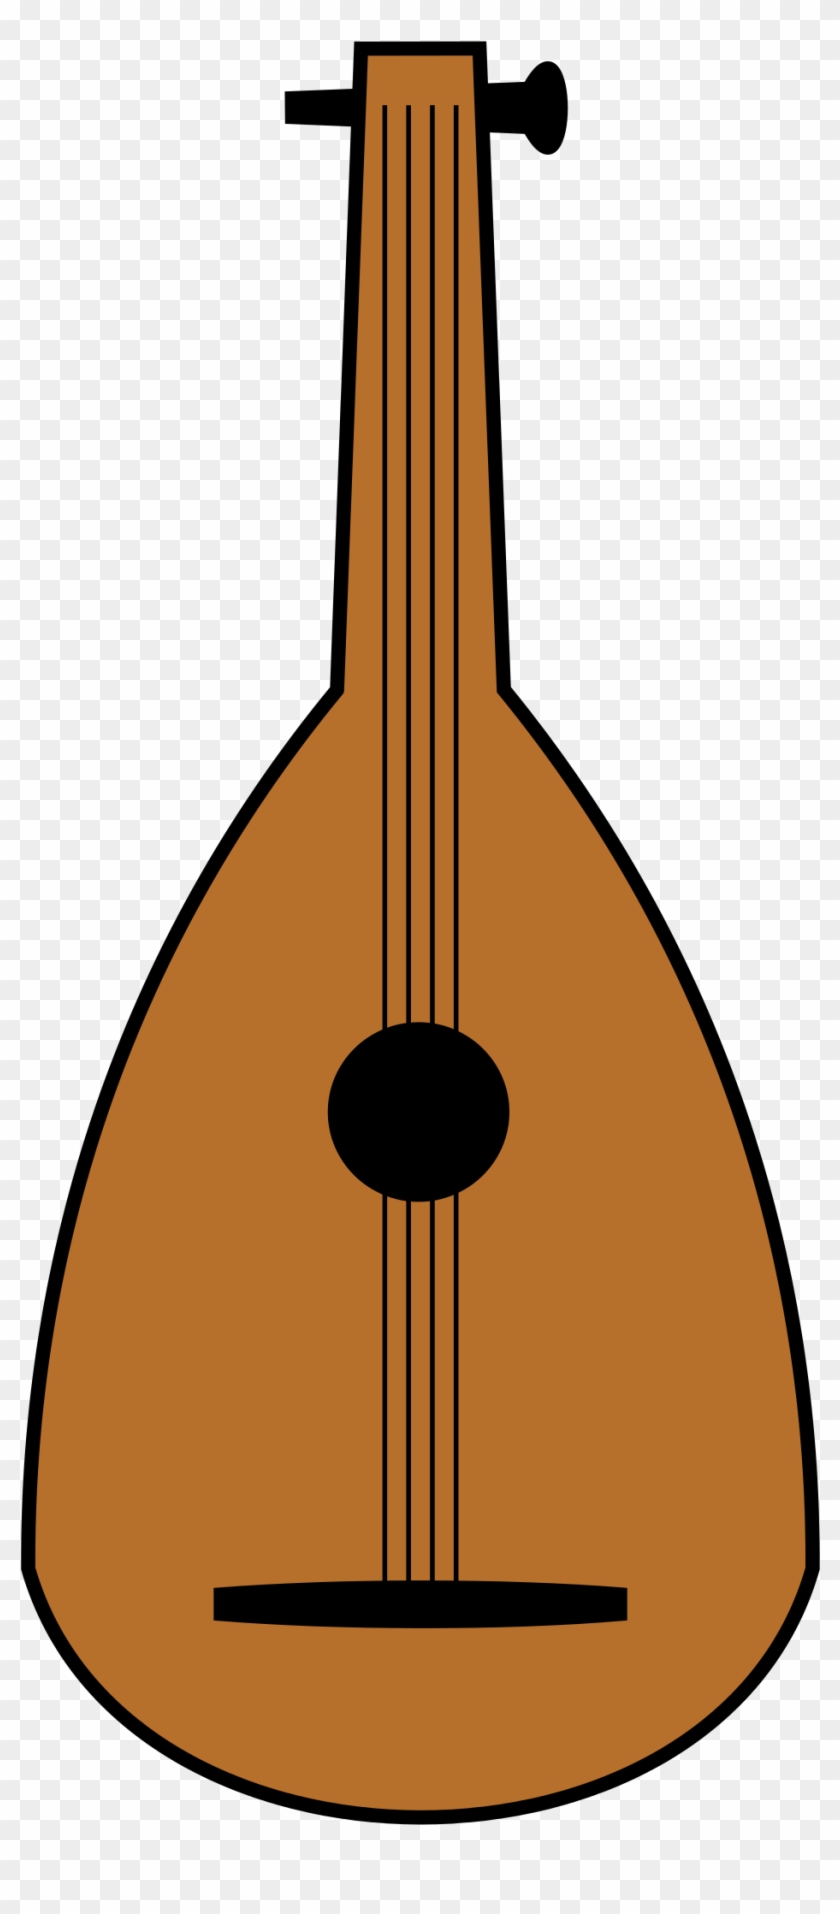 Open - Indian Musical Instruments #1225445